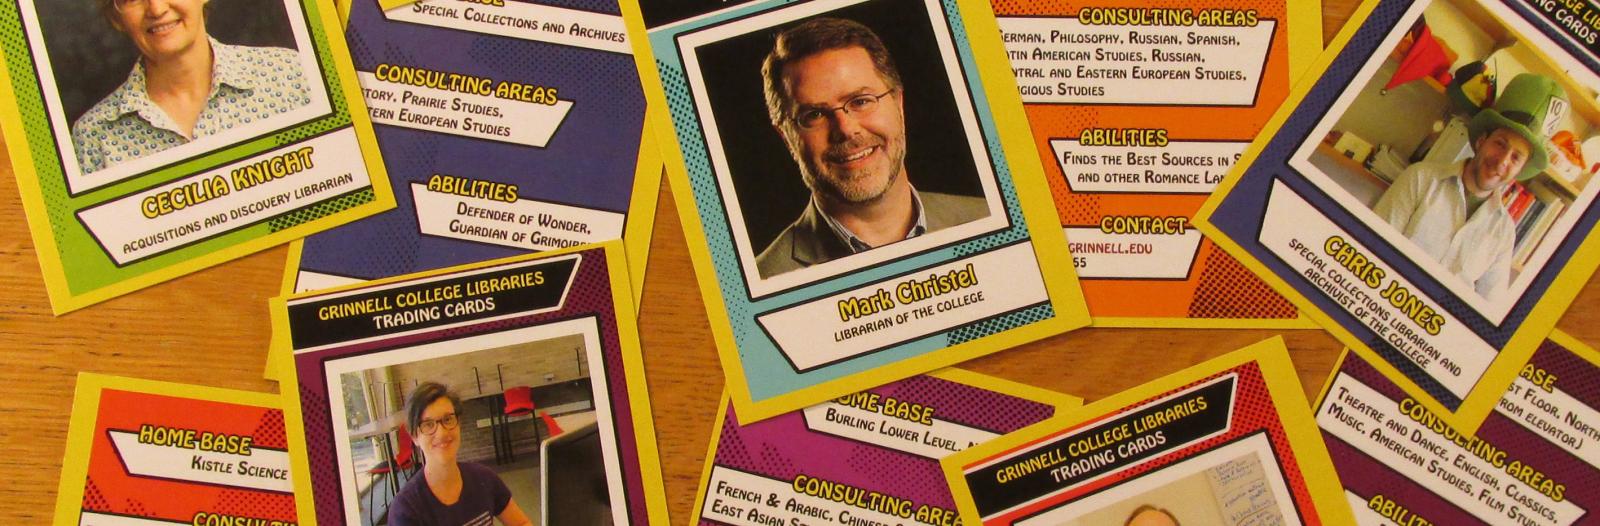 Librarian trading cards featuring Cecilia Knight, Mark Christel, Chris Jones, Liz Rodrigues, and Keven Engel